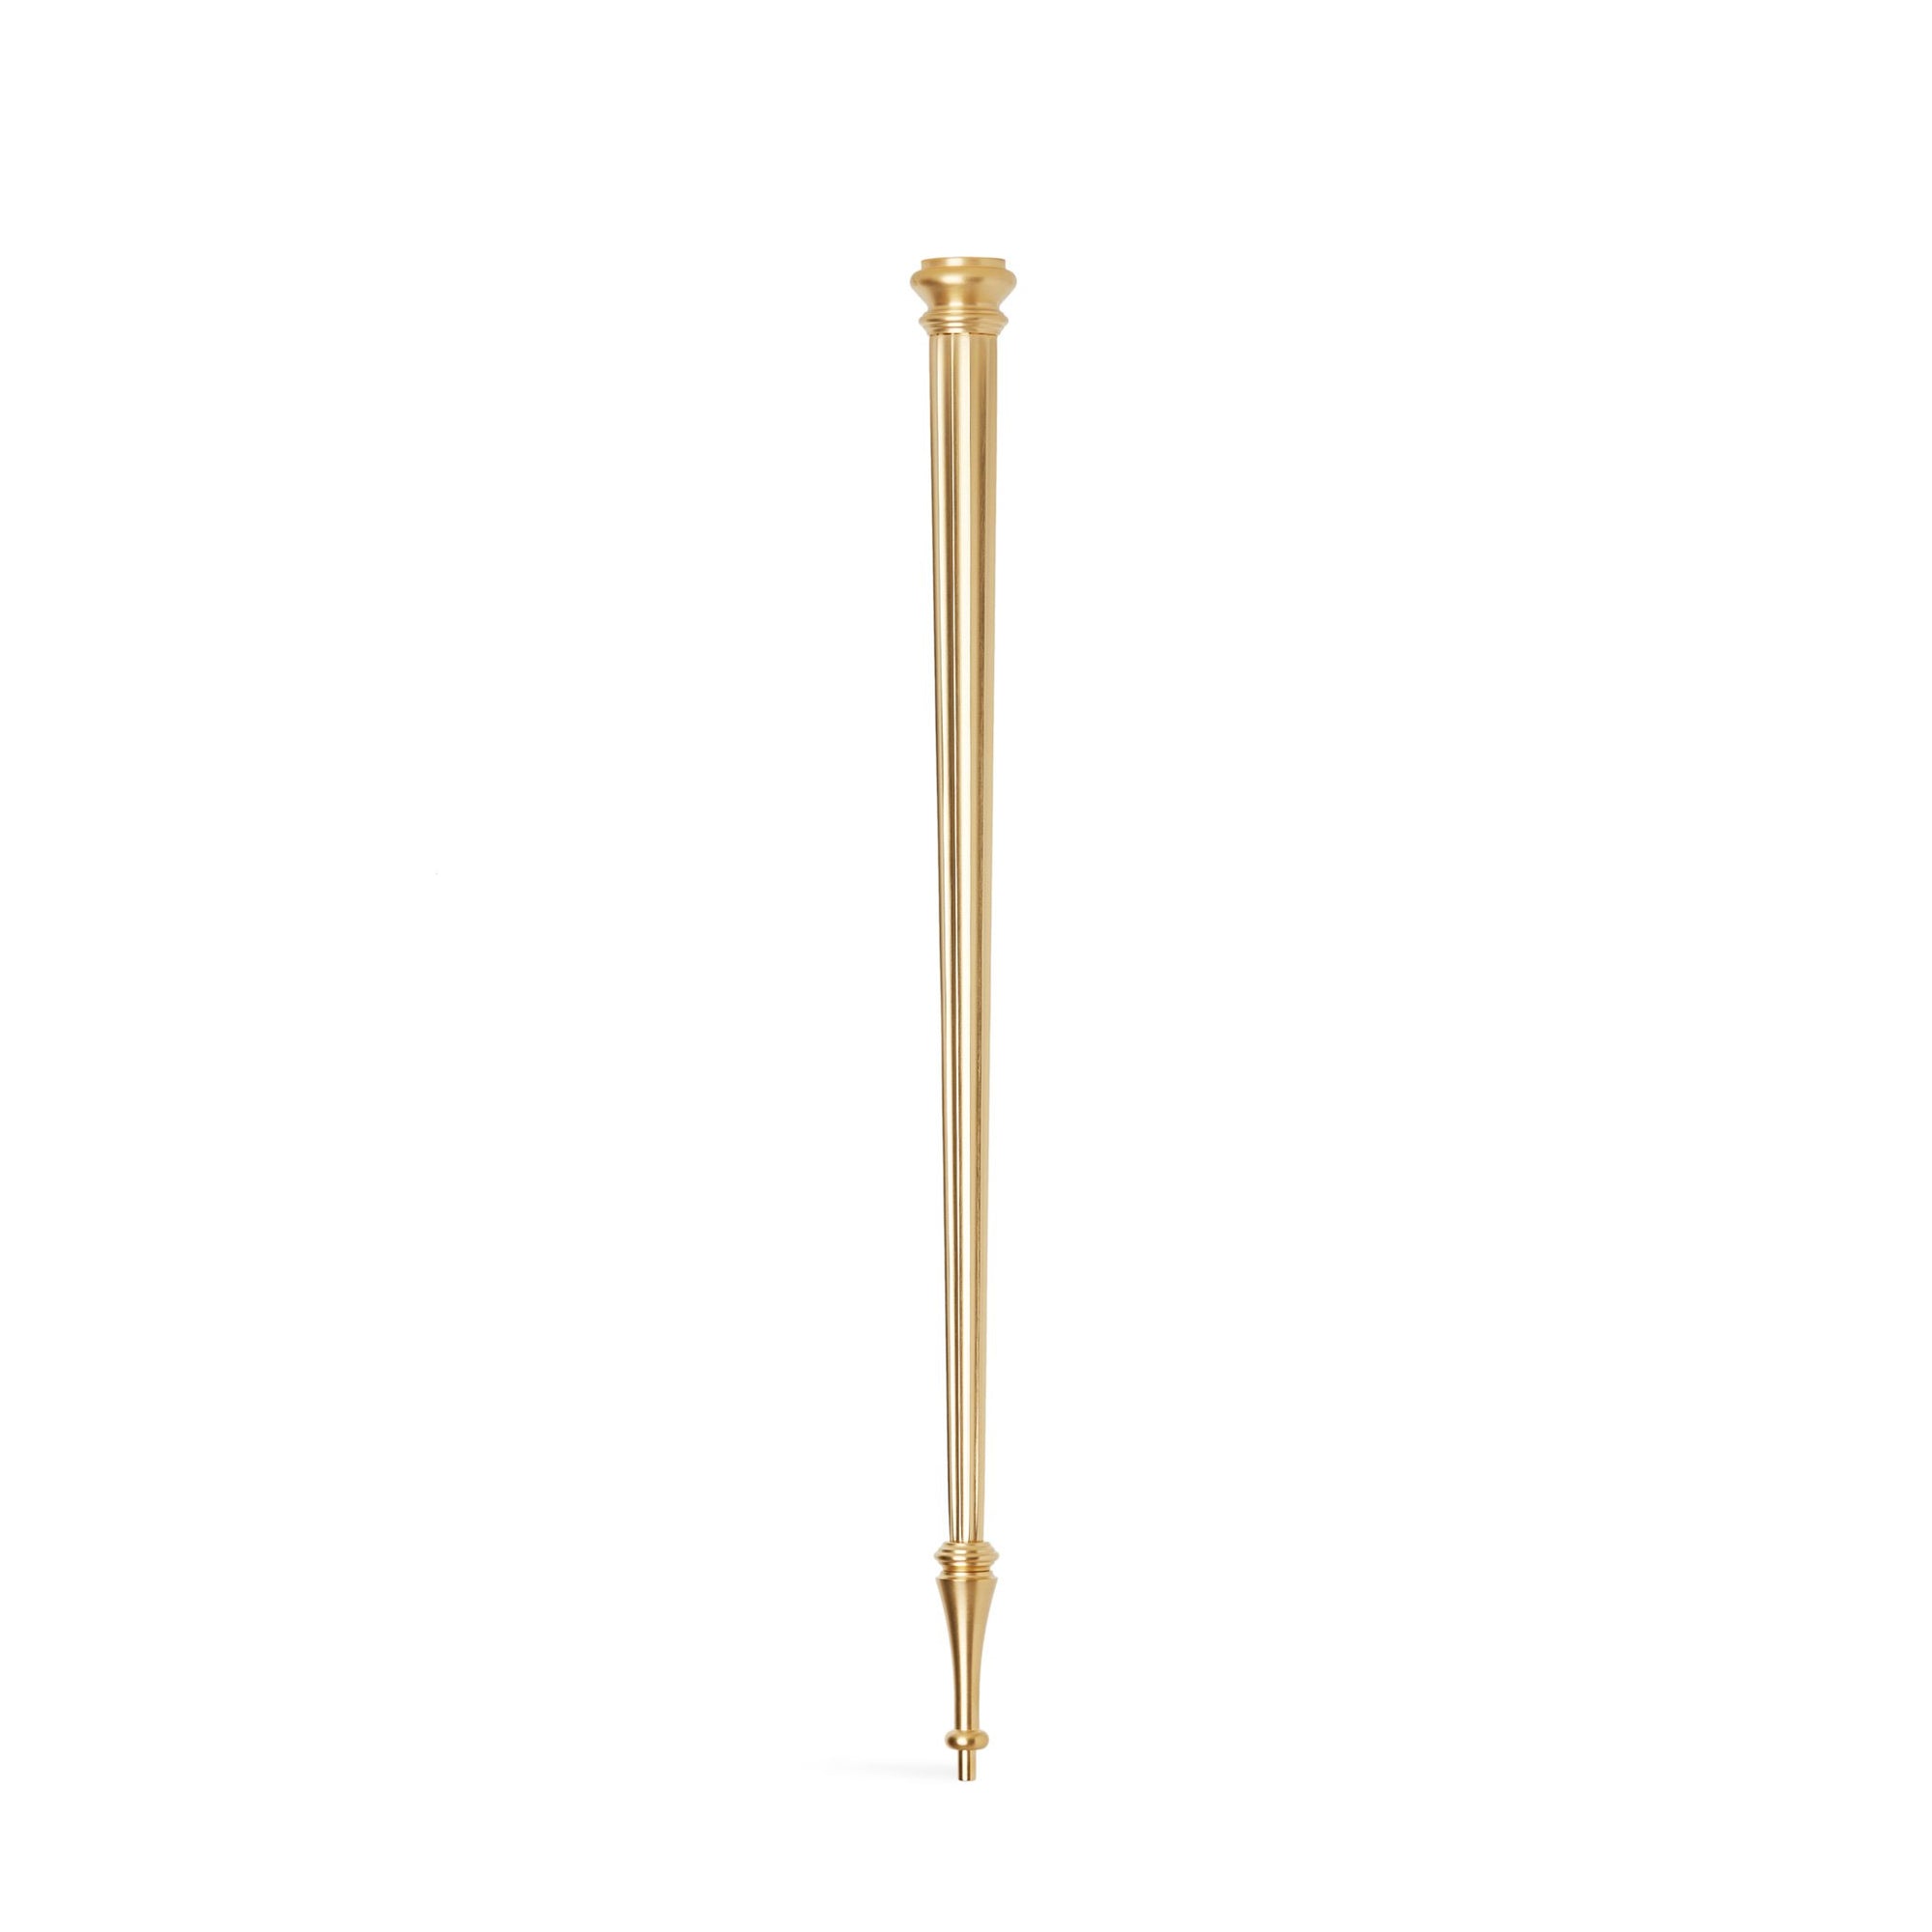 4755-GP Sherle Wagner International Tapered Leg in Gold Plate metal finish